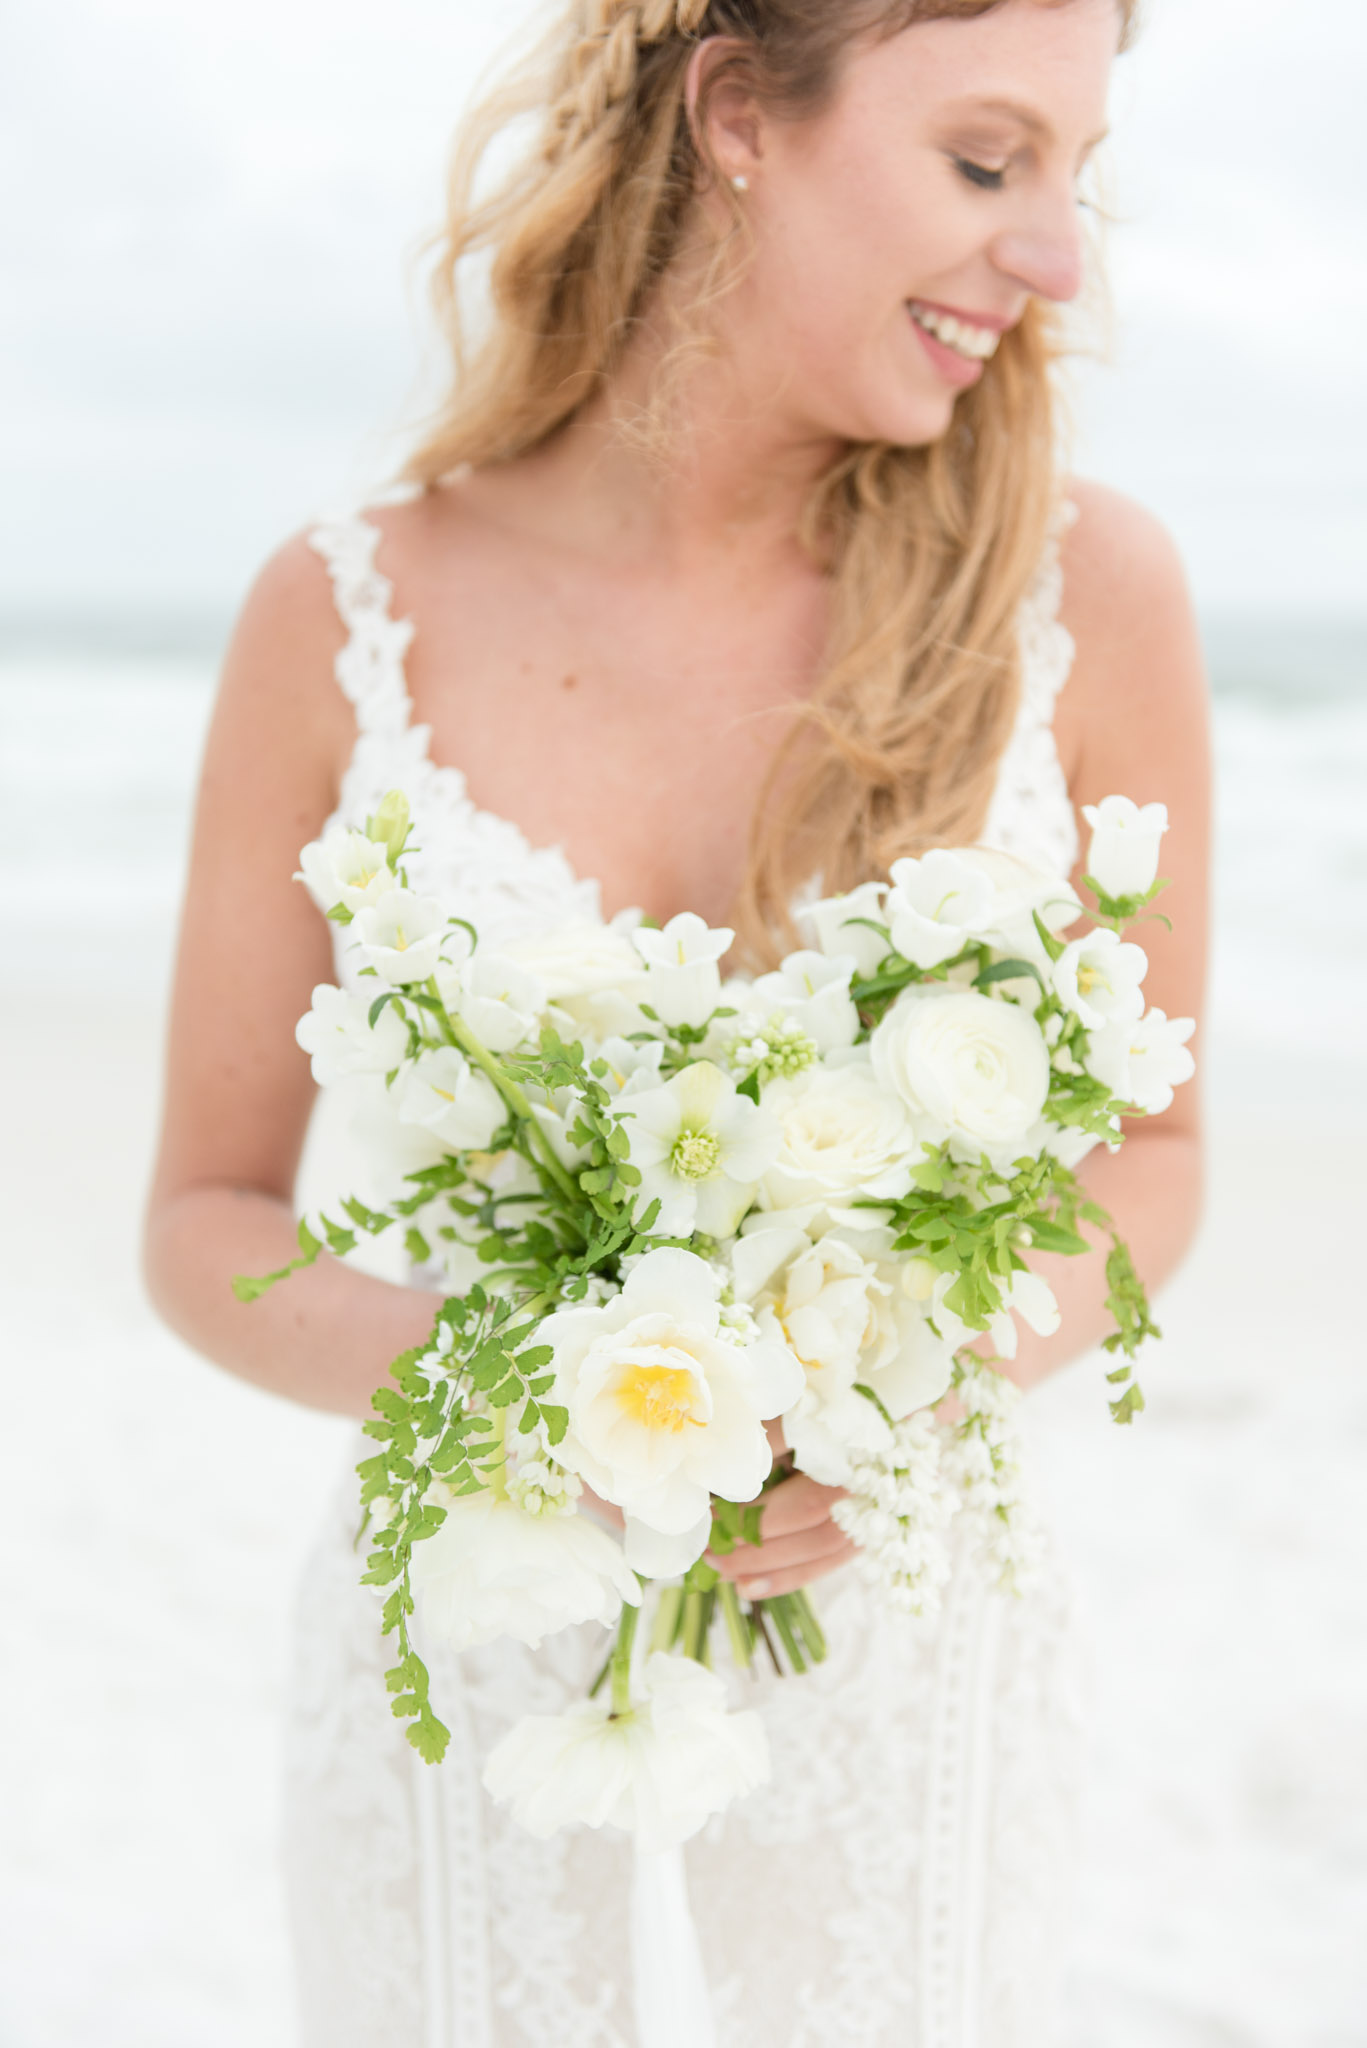 Bride smiles as she holds bouquet.